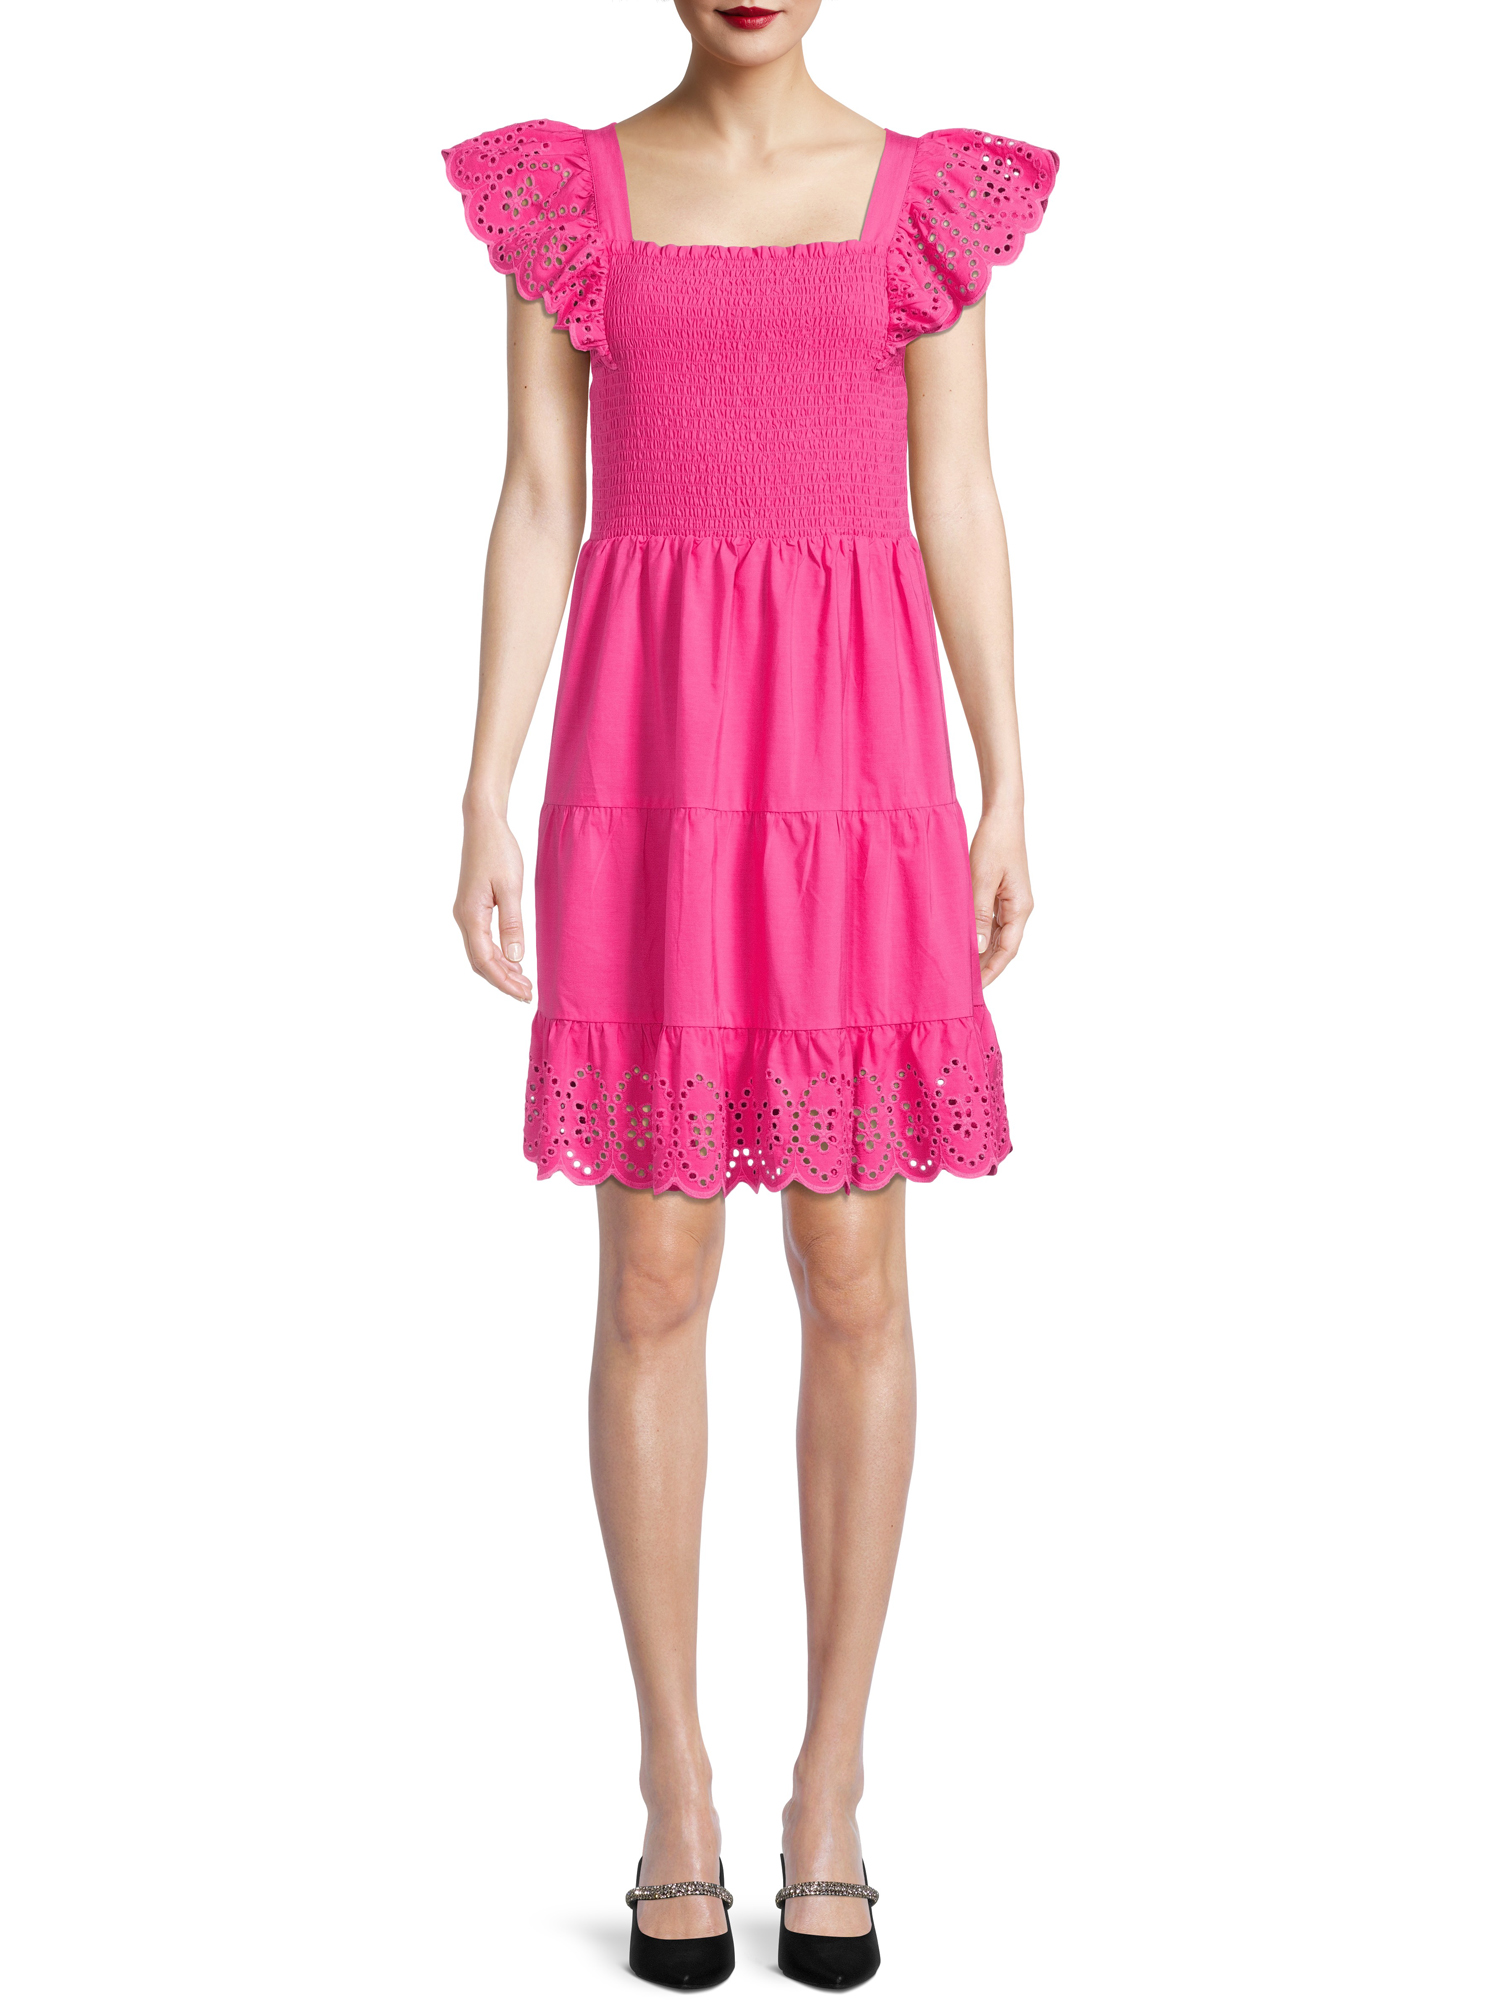 Time And Tru Women's Smocked Eyelet Dress - image 1 of 5